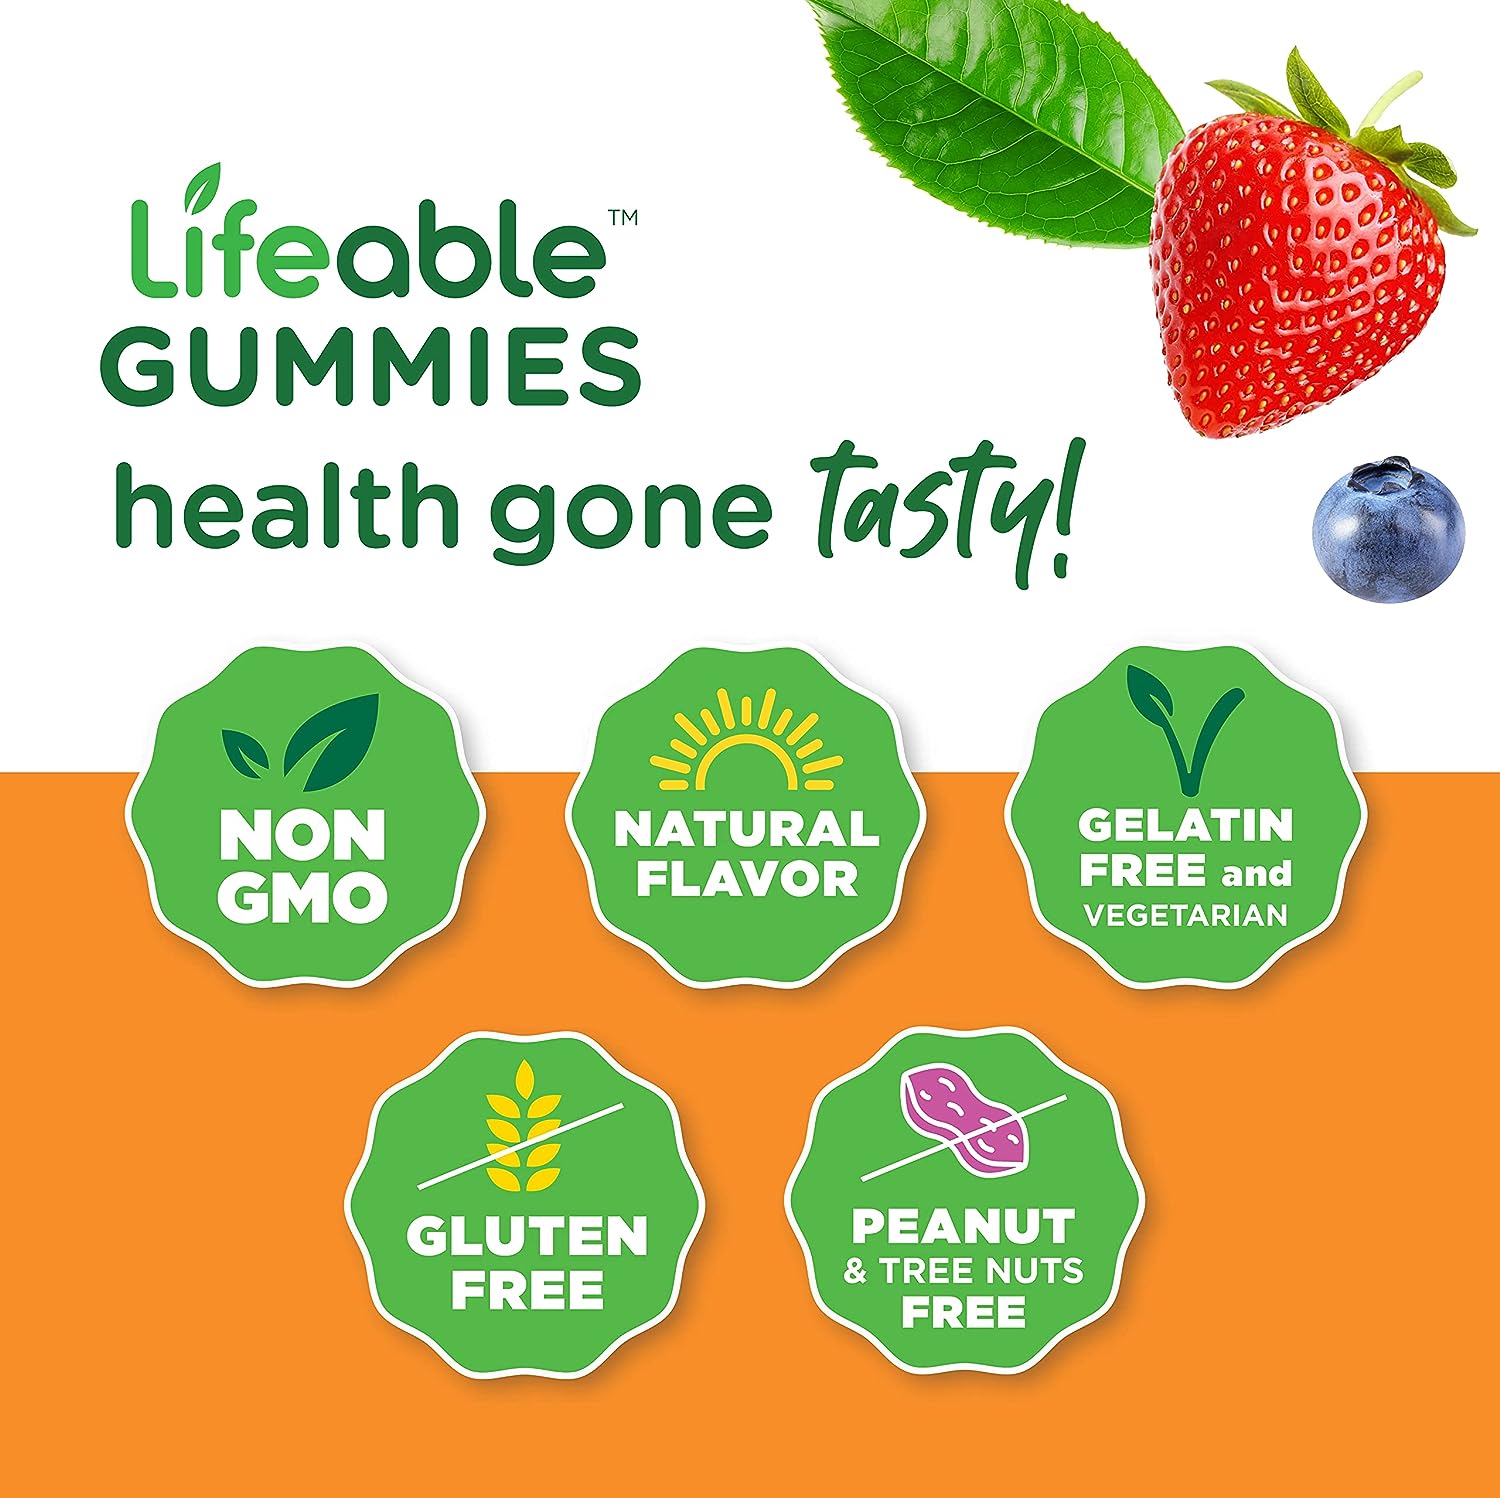 Lifeable Prebiotic Fiber Supplement Gummies for Kids - 5g - Great Tasting Natural Flavored Gummy - Gluten Free, Vegetarian, GMO Free Chewable - for Children, Teen, Toddler - 90 Gummies - 45 Doses : Health & Household